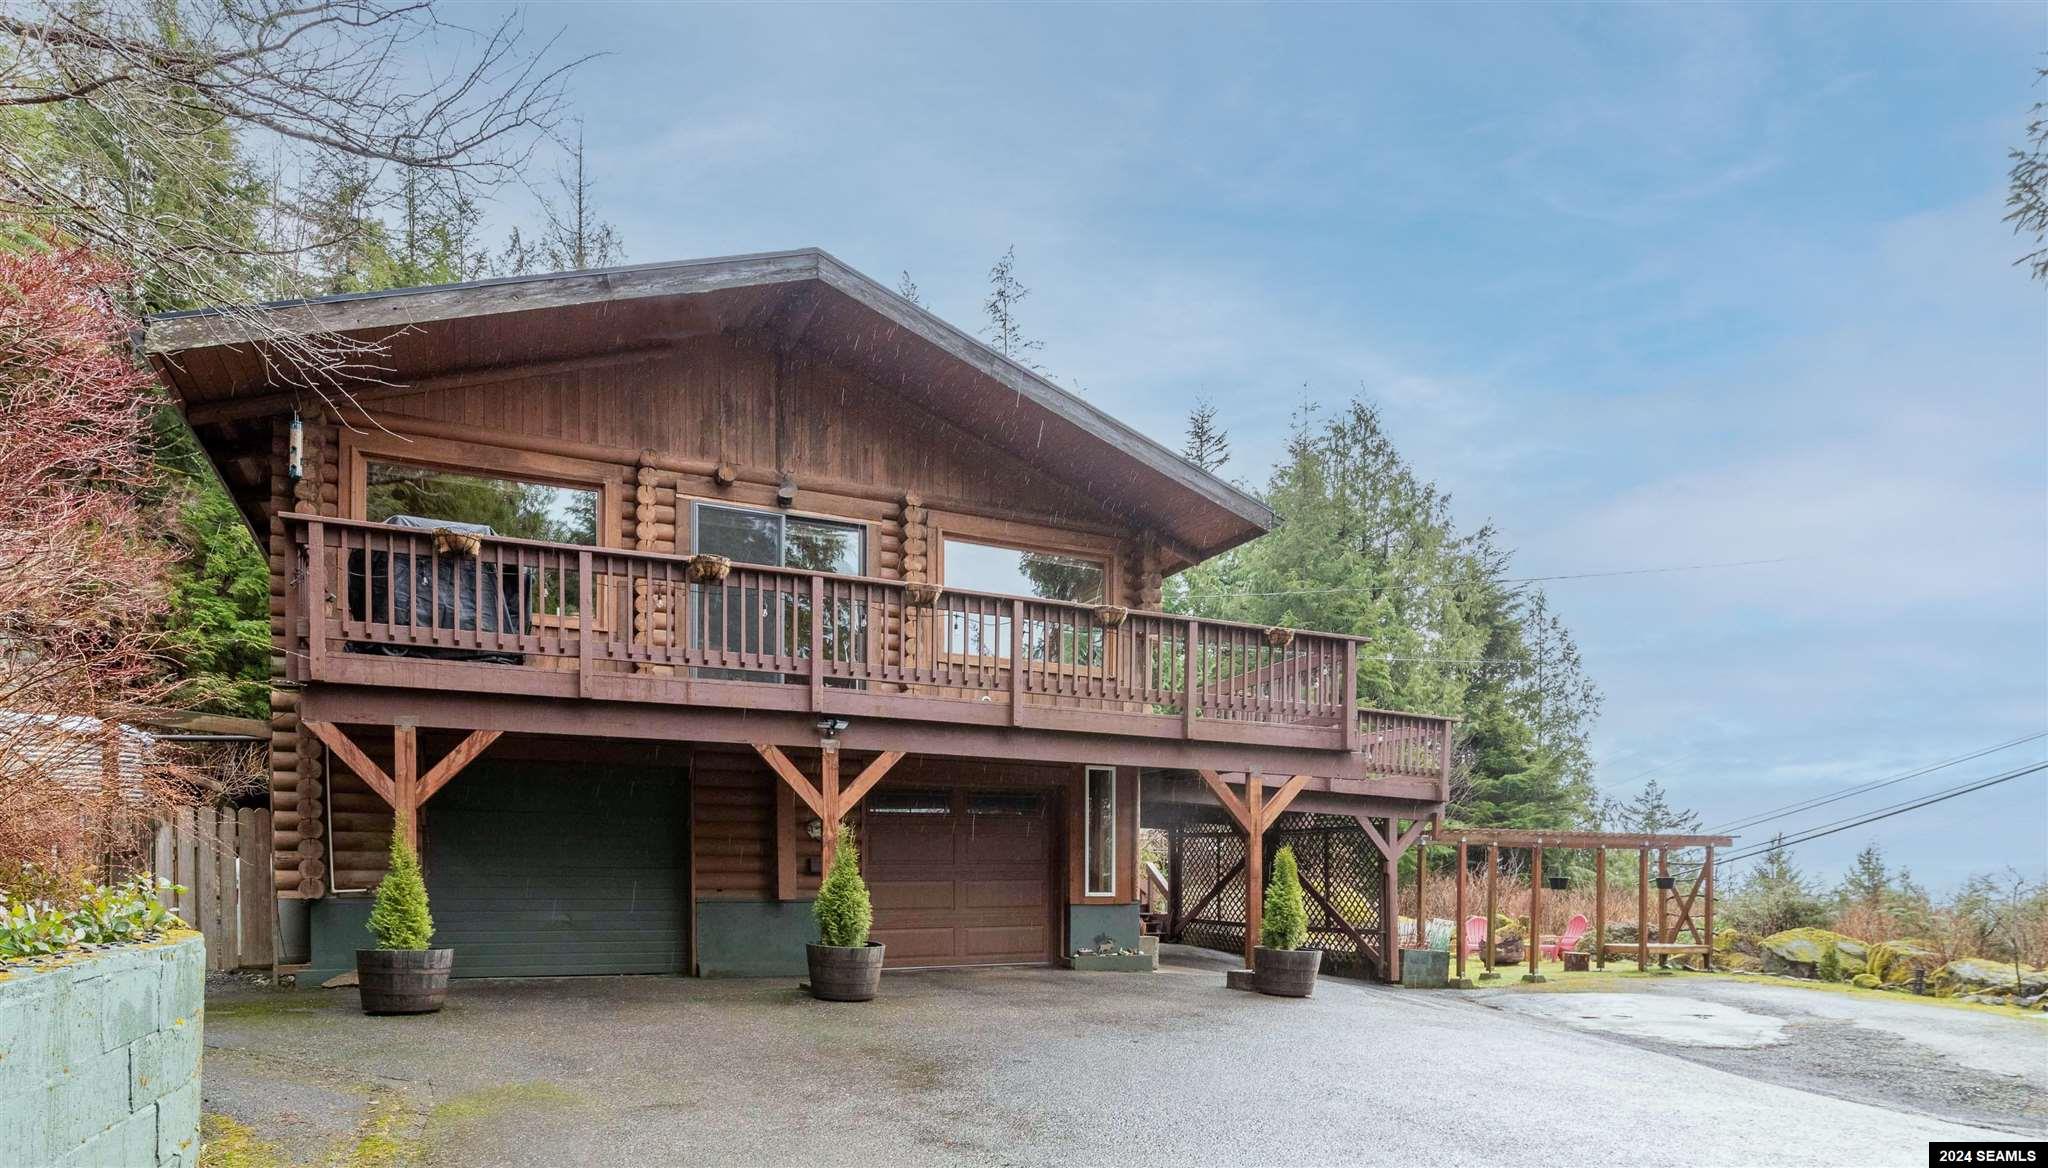 12332 Tongass Hwy., Ketchikan, AK 99901-9629, 4 Bedrooms Bedrooms, ,3 BathroomsBathrooms,Residential,For Sale,Tongass Hwy.,24137